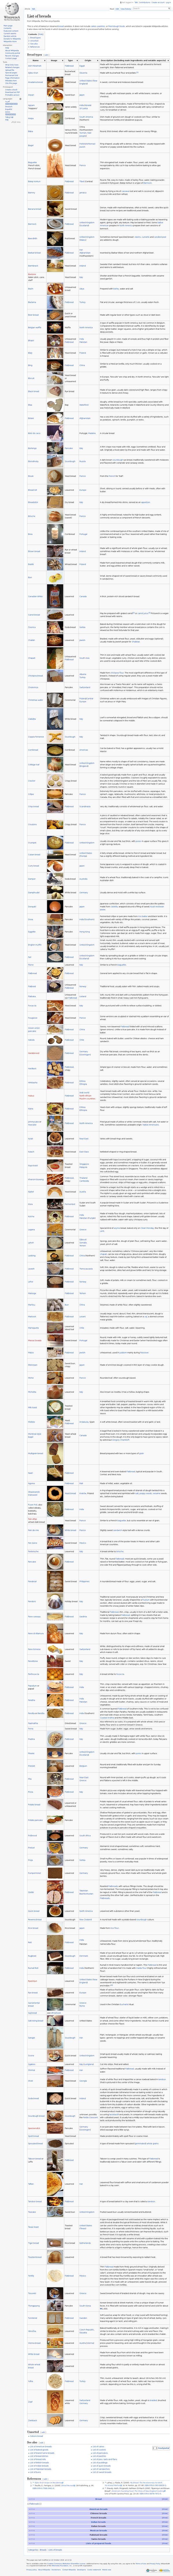 List of breads - Wikipedia, the free encyclopedia